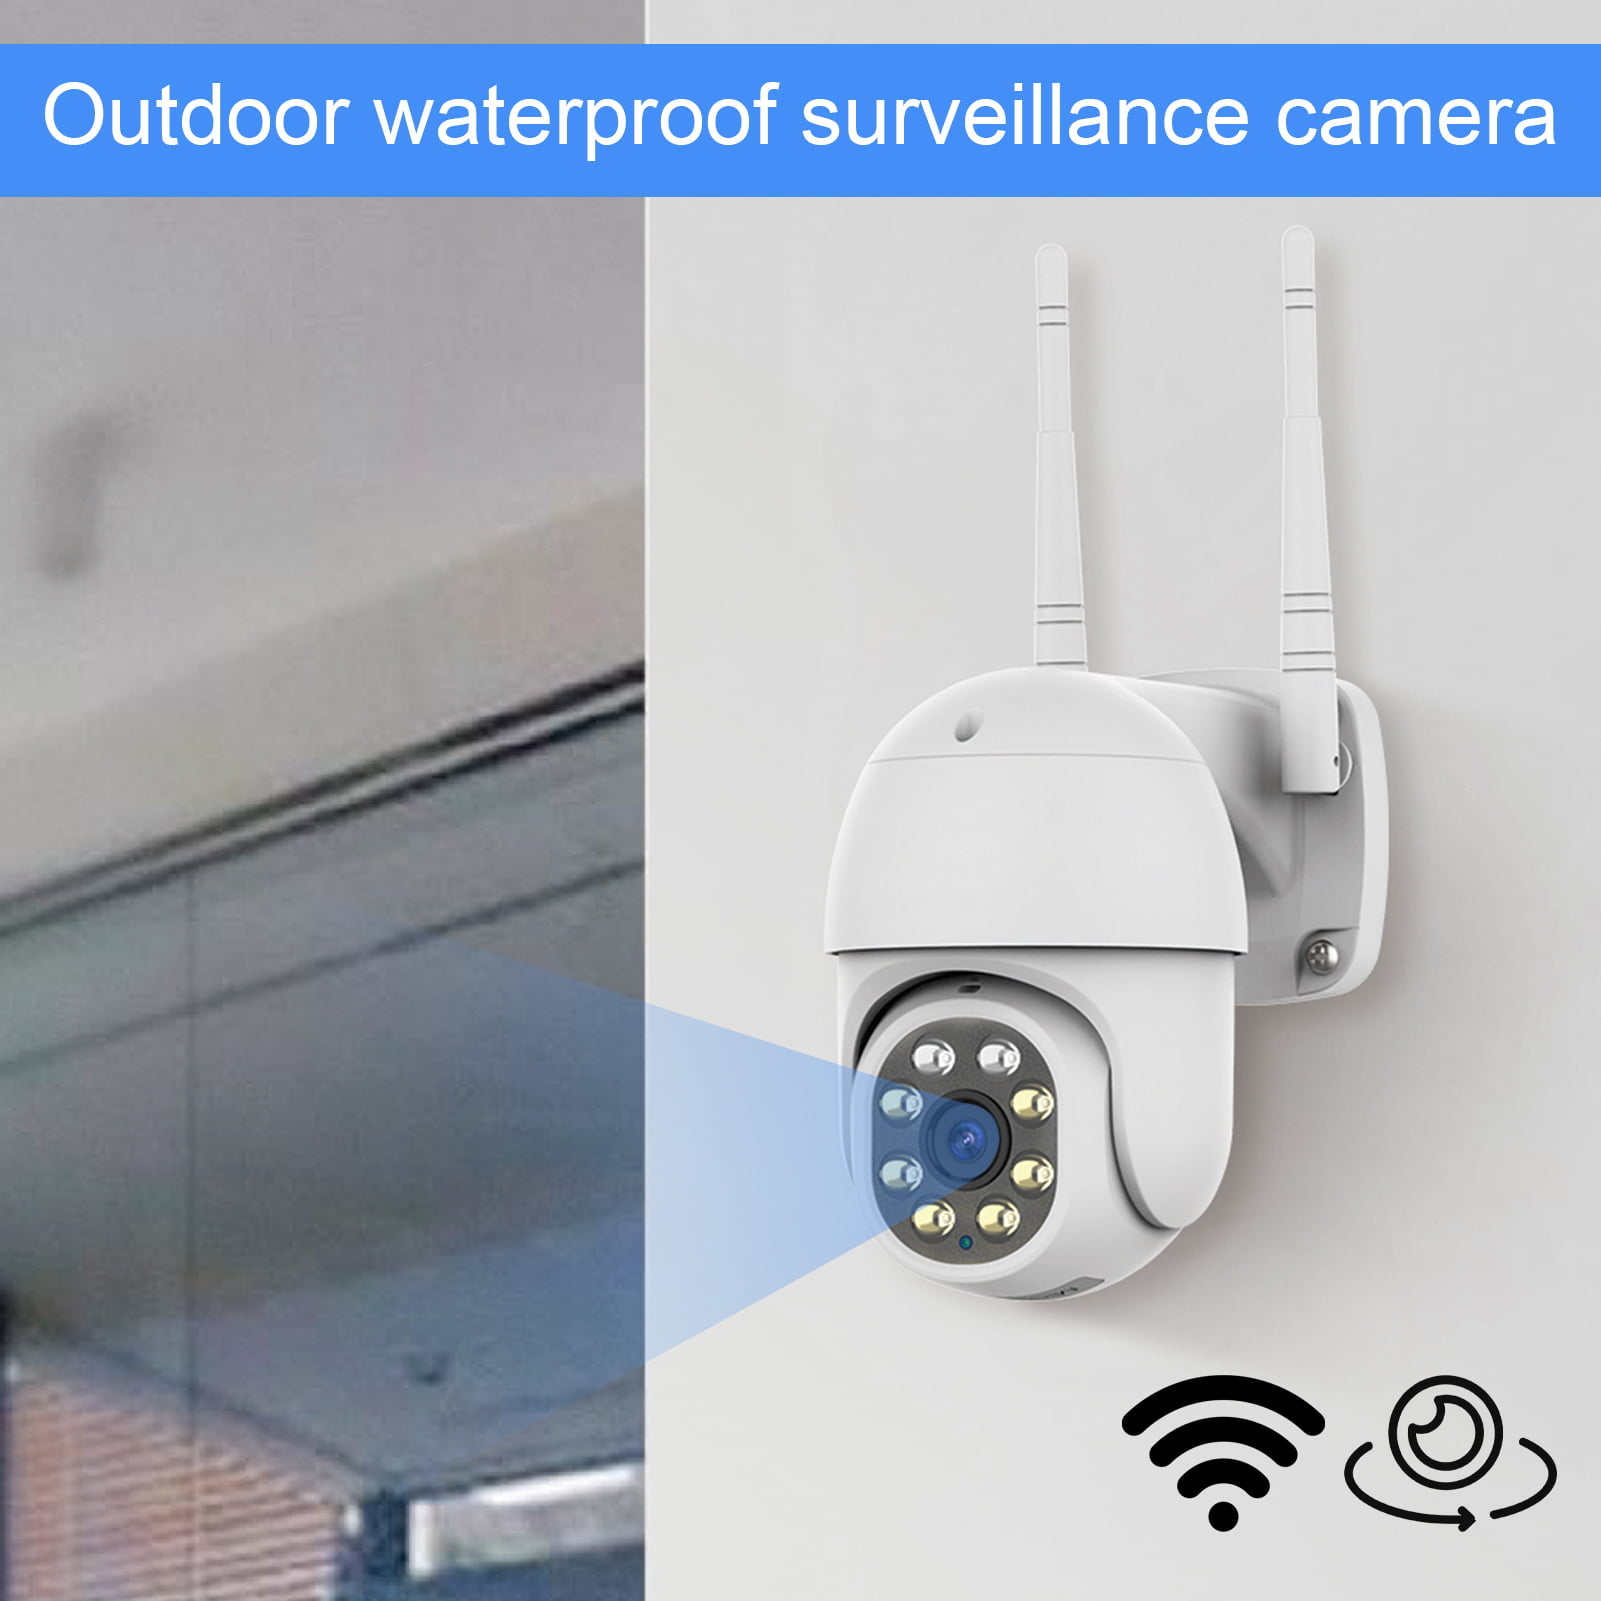 Ybeauty ZC-X4-B16 Security Camera Plug Play Motion Detection Automatic  Tracking H.264 2MP Mini Waterproof WiFi IP Camera for Outdoor - Walmart.com